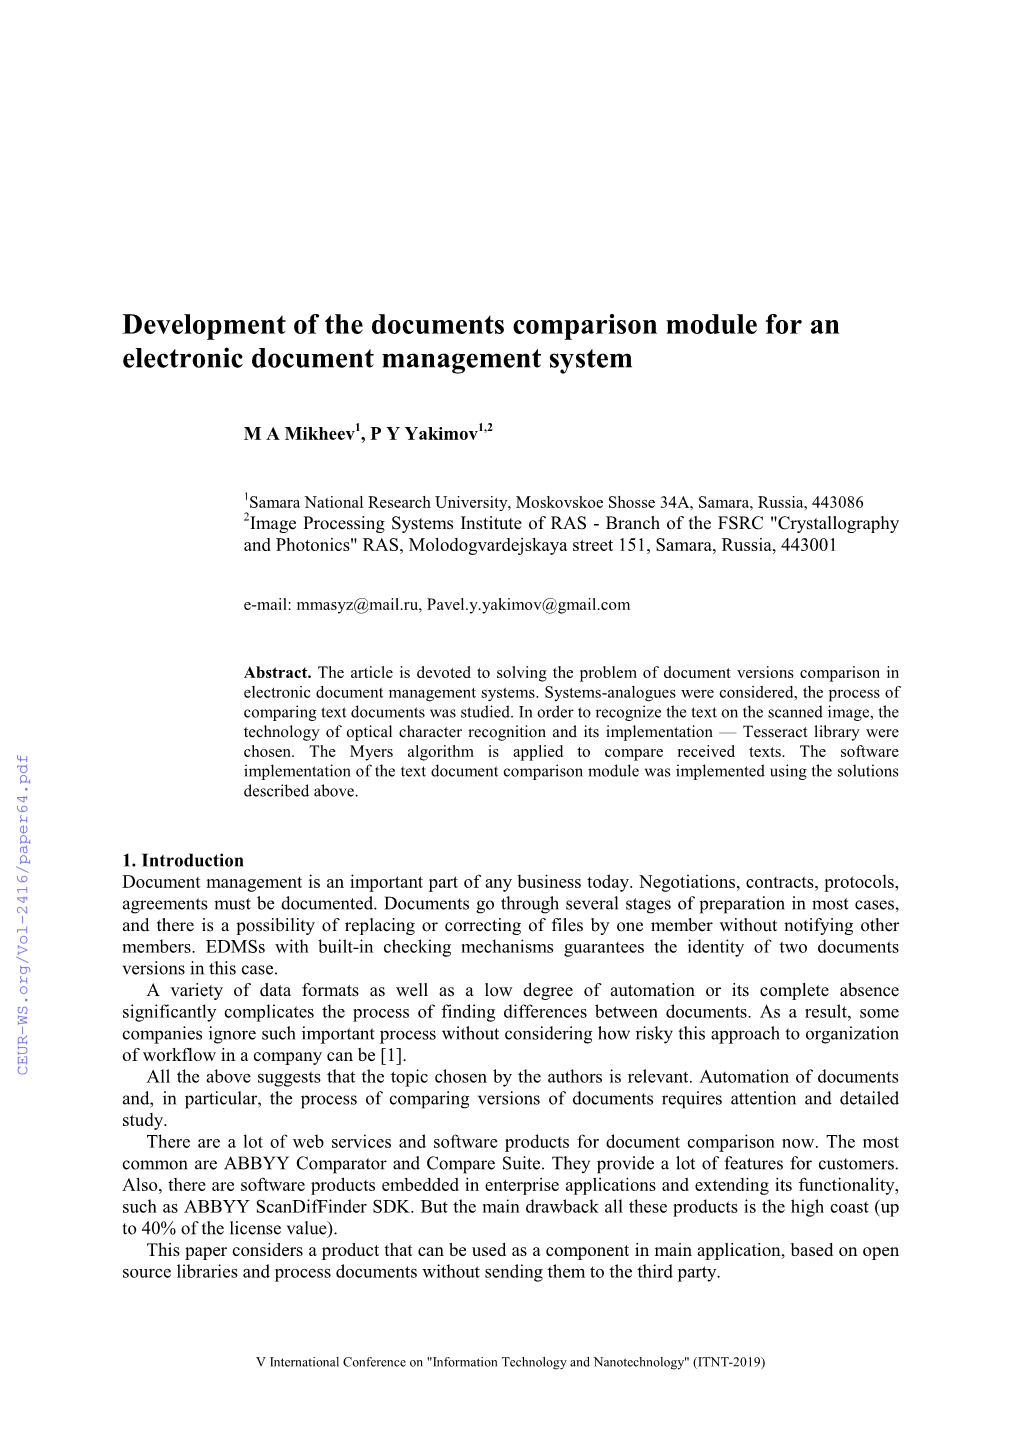 Development of the Documents Comparison Module for an Electronic Document Management System